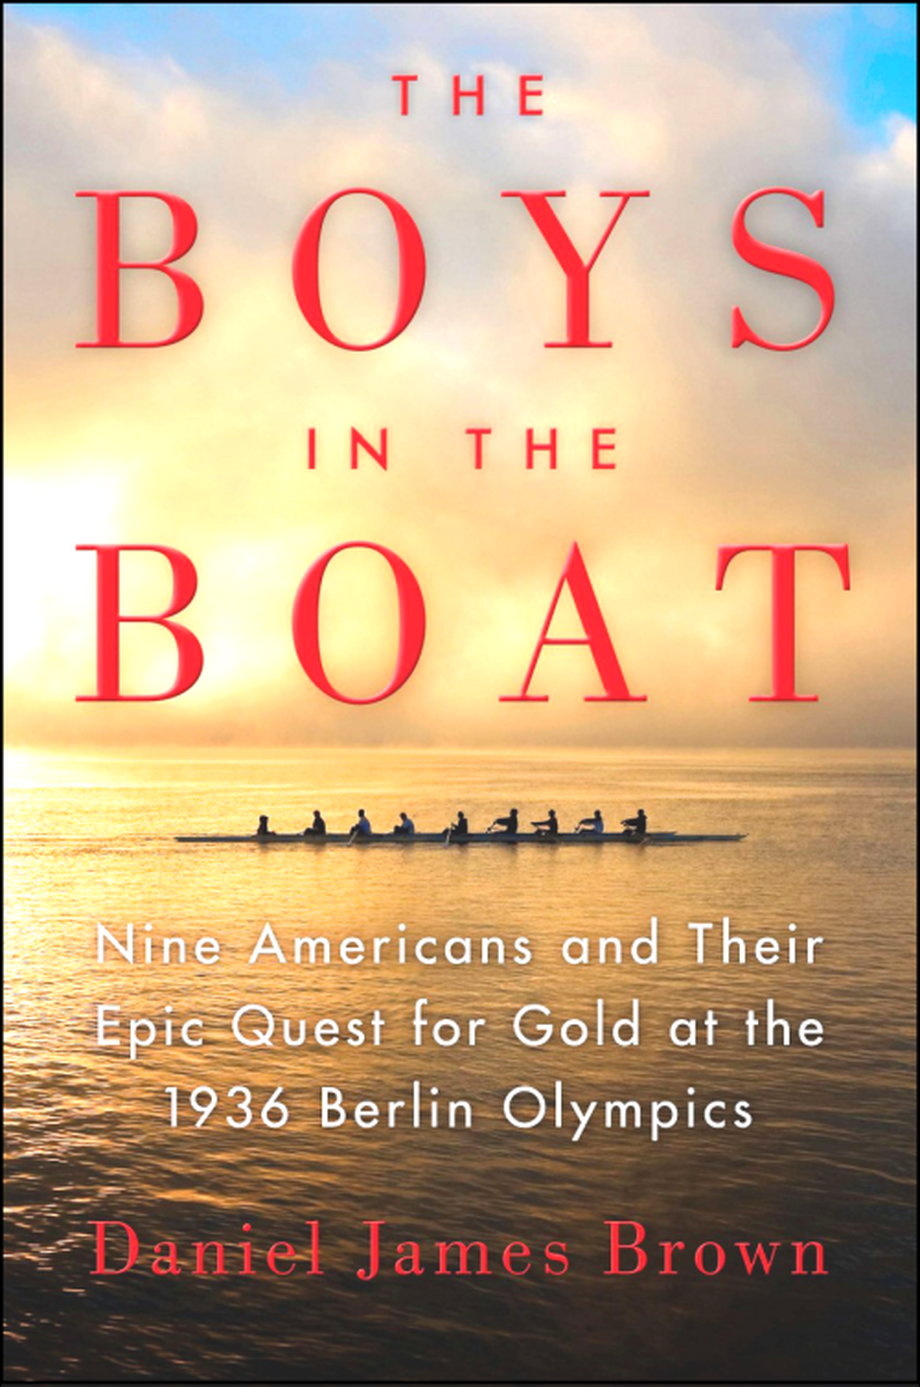 When Microsoft CEO Satya Nadella shook up the company's management in April 2014, he said it was a leadership lesson taken from "The Boys in the Boat," by ex-Microsoftie Daniel James Brown, about the USA Rowing Team at the 1936 Olympics.